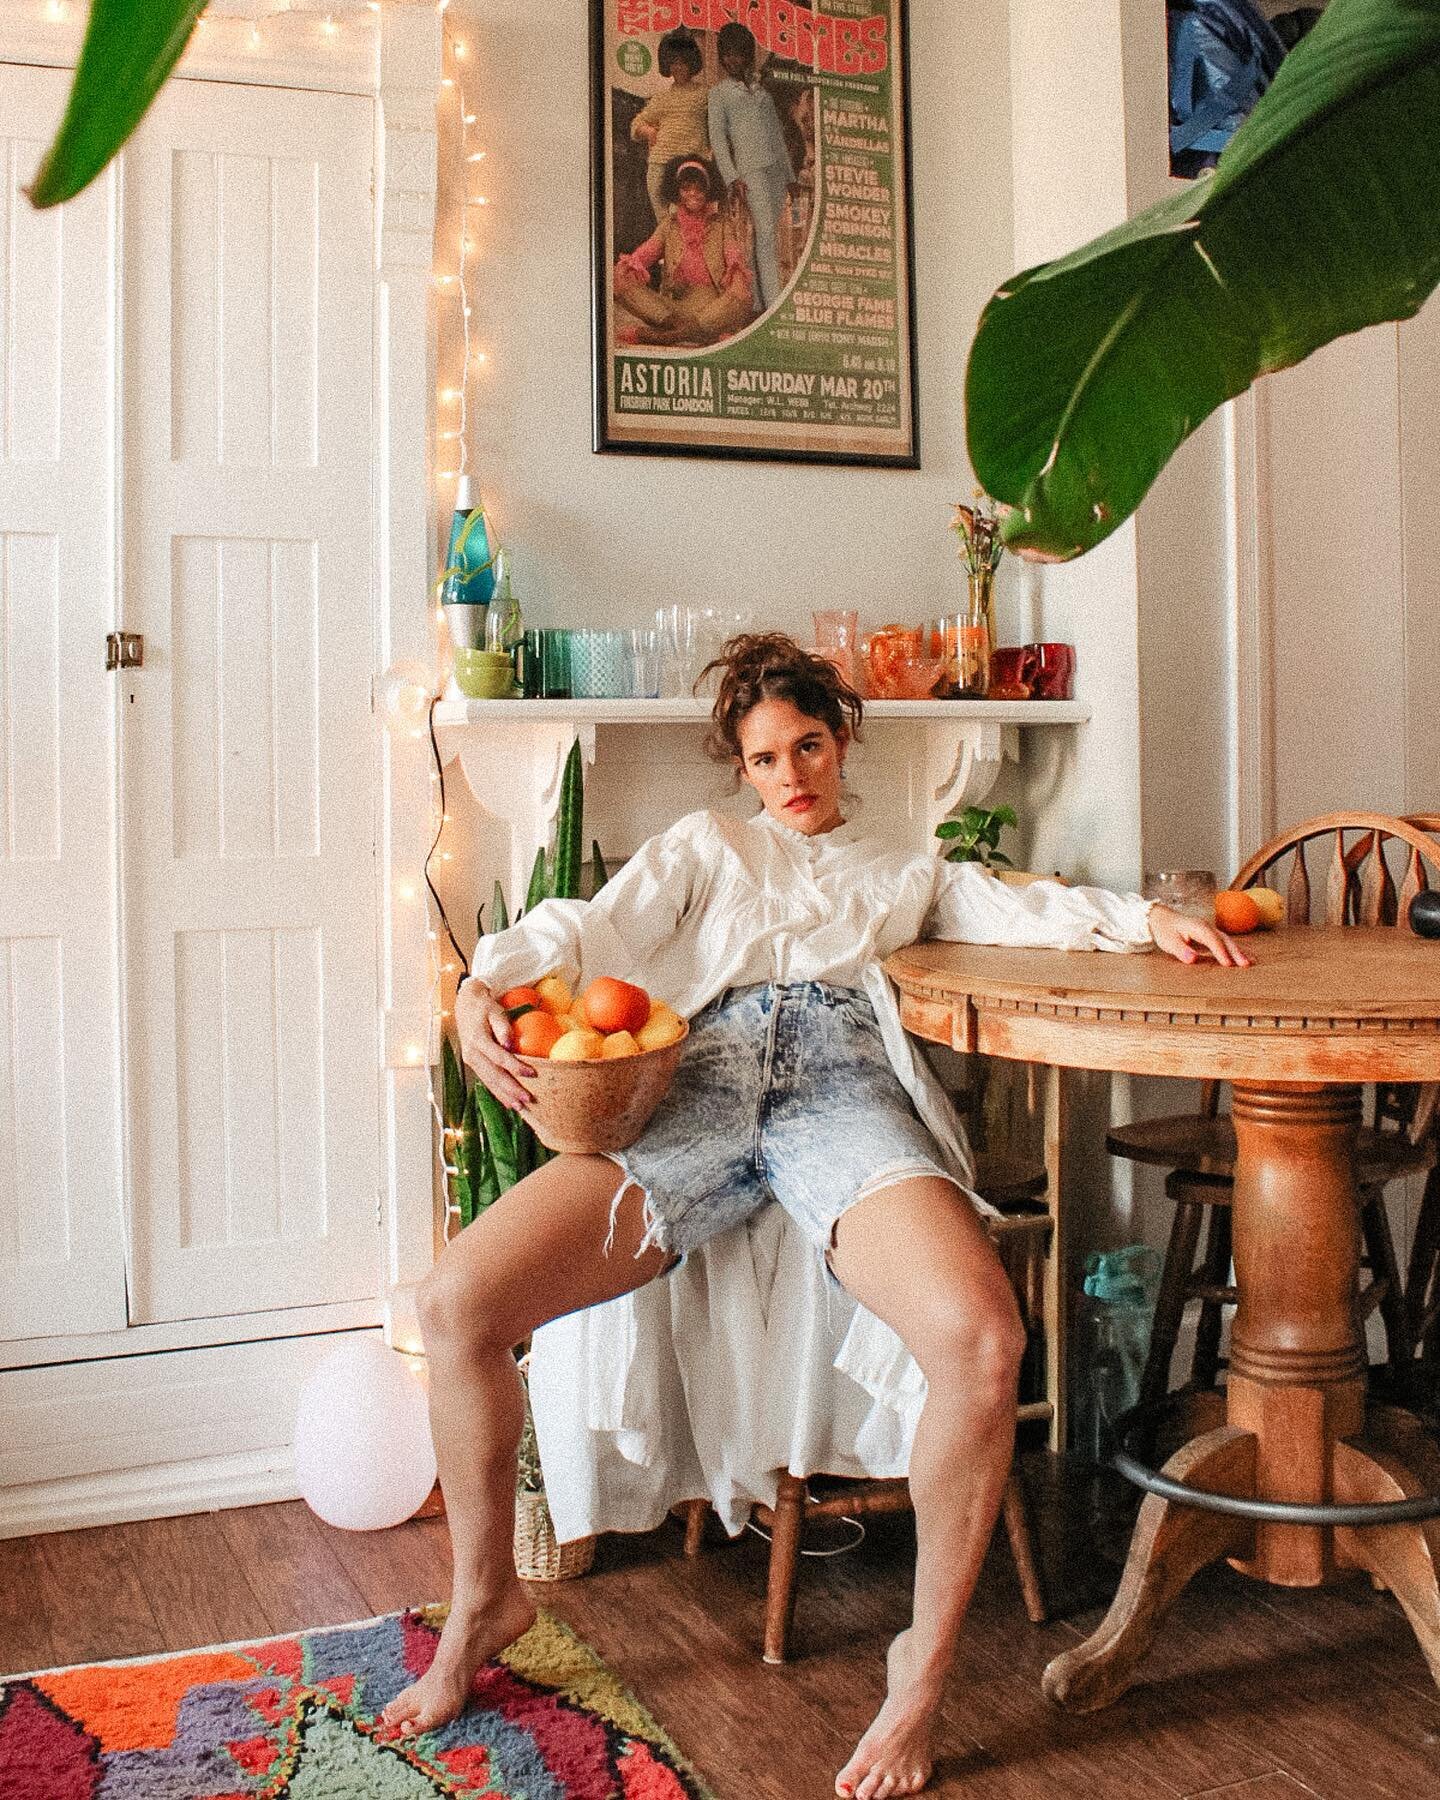 we spent the afternoon with the incomparable @abthemusic at her gorgeous Fairmount apartment, and then made a lookbook out of it, which is now live! Check out Girl Friday on the site now and shop Ab&rsquo;s looks!